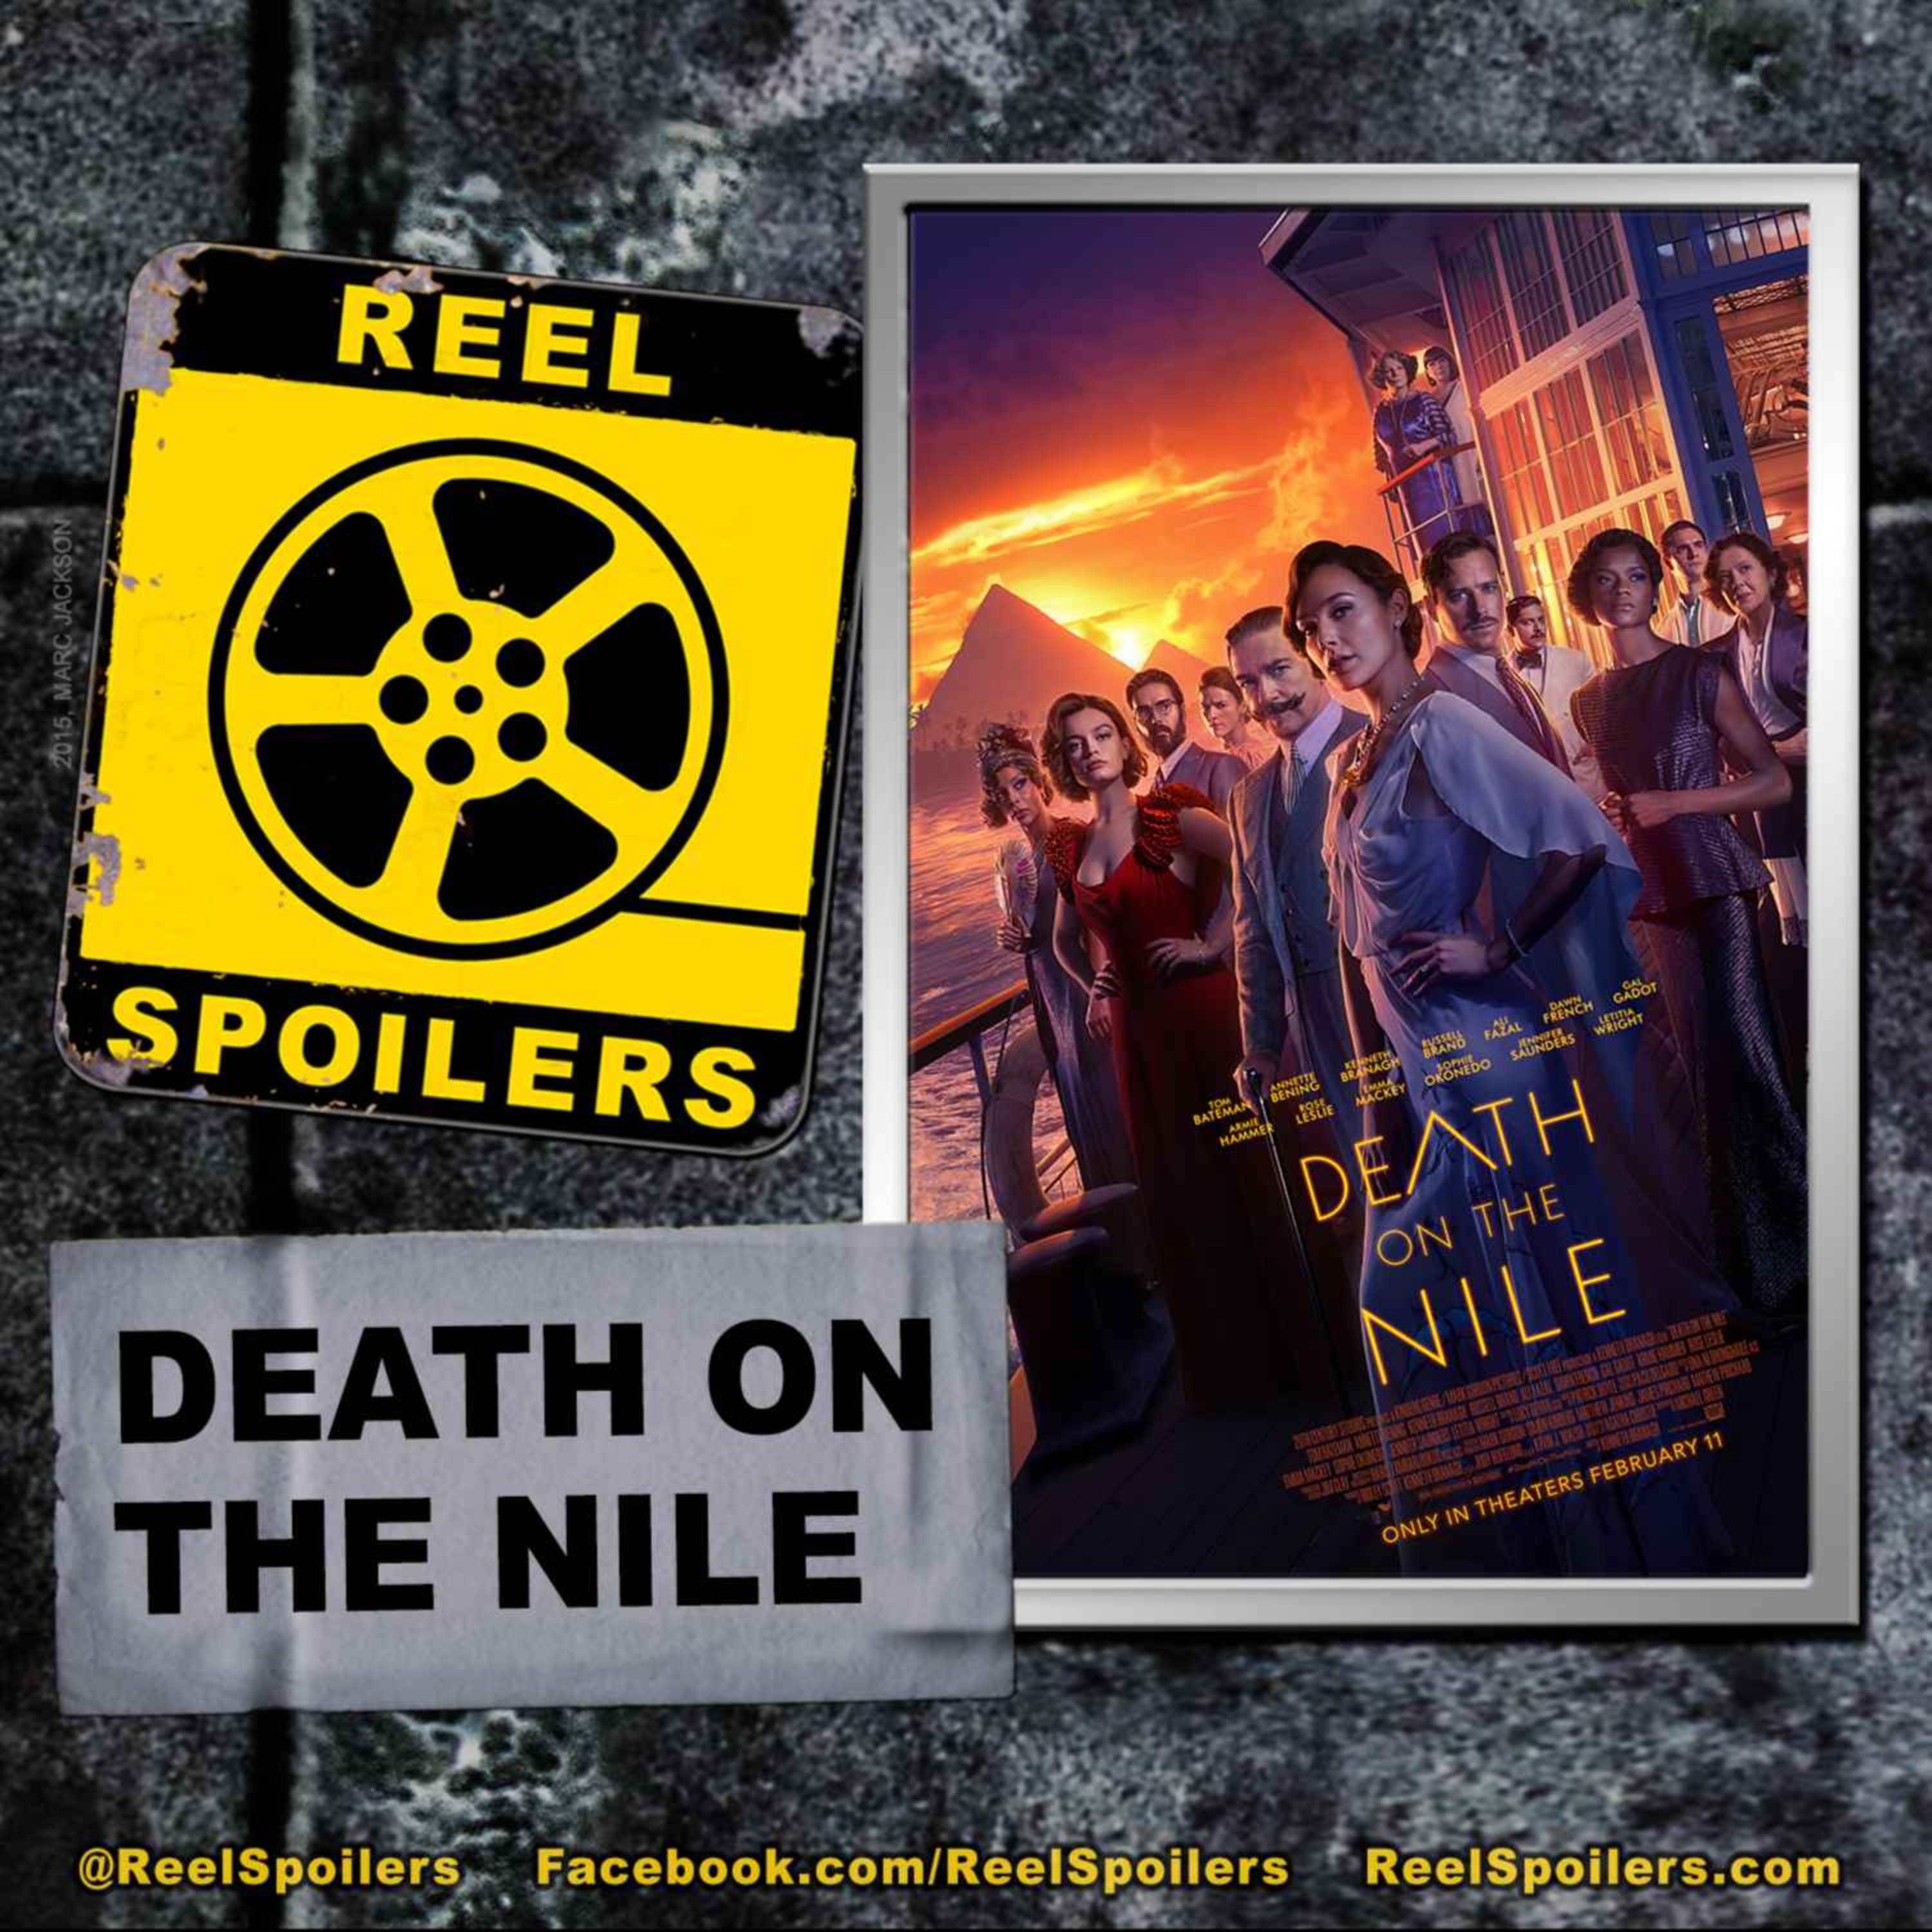 DEATH ON THE NILE Starring Kenneth Branagh, Annette Bening, Gal Gadot Image